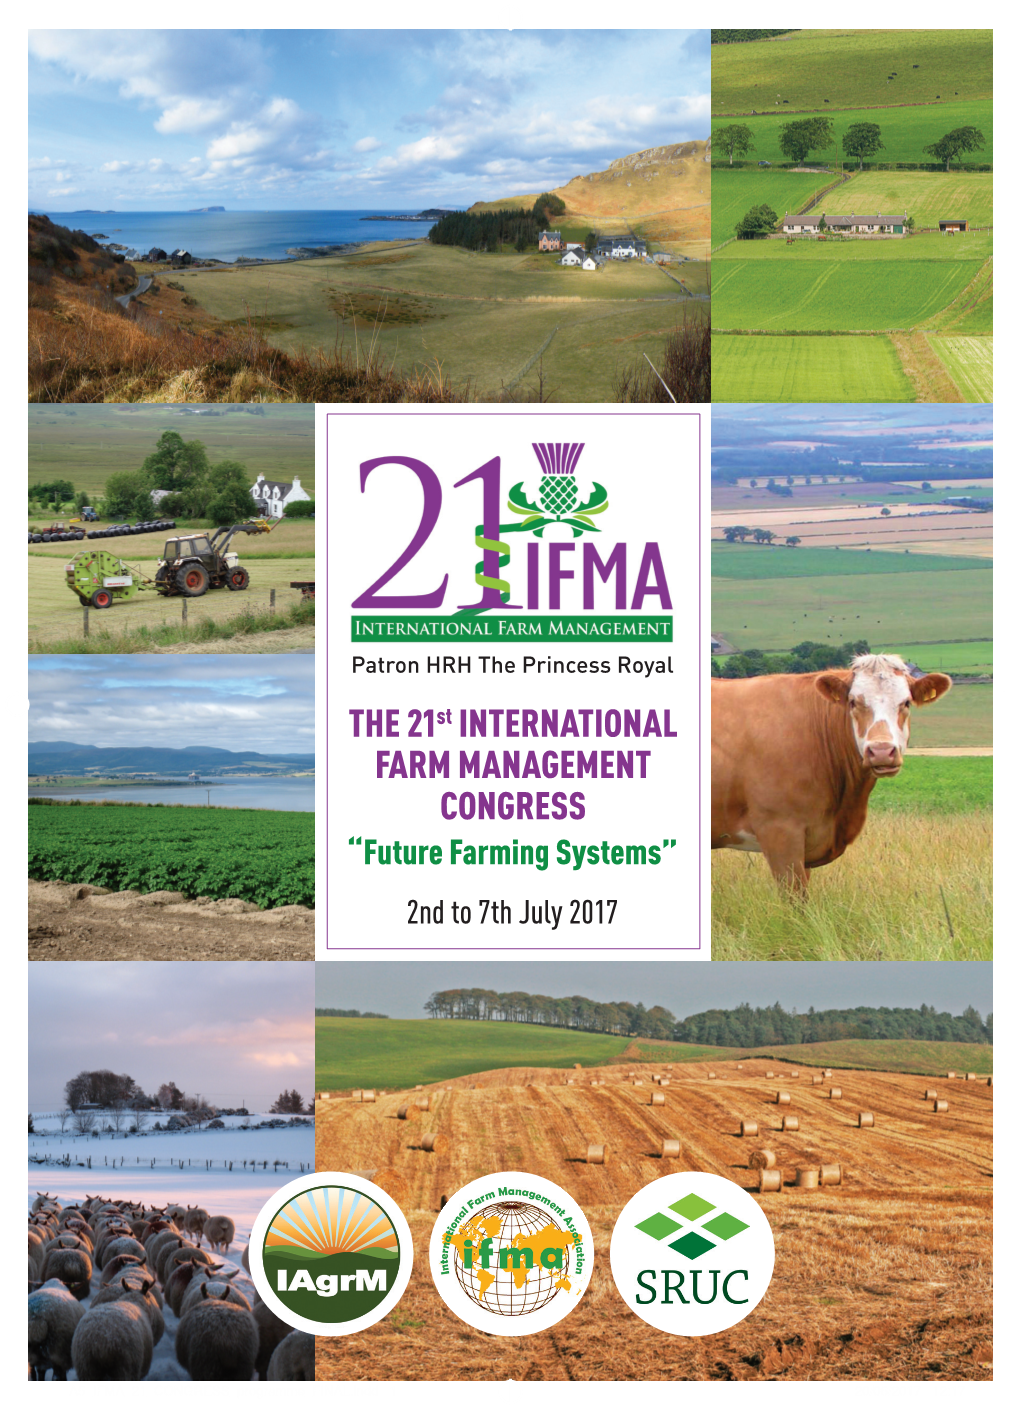 The 21St International Farm Management Congress “Future Farming Systems” 2Nd to 7Th July 2017